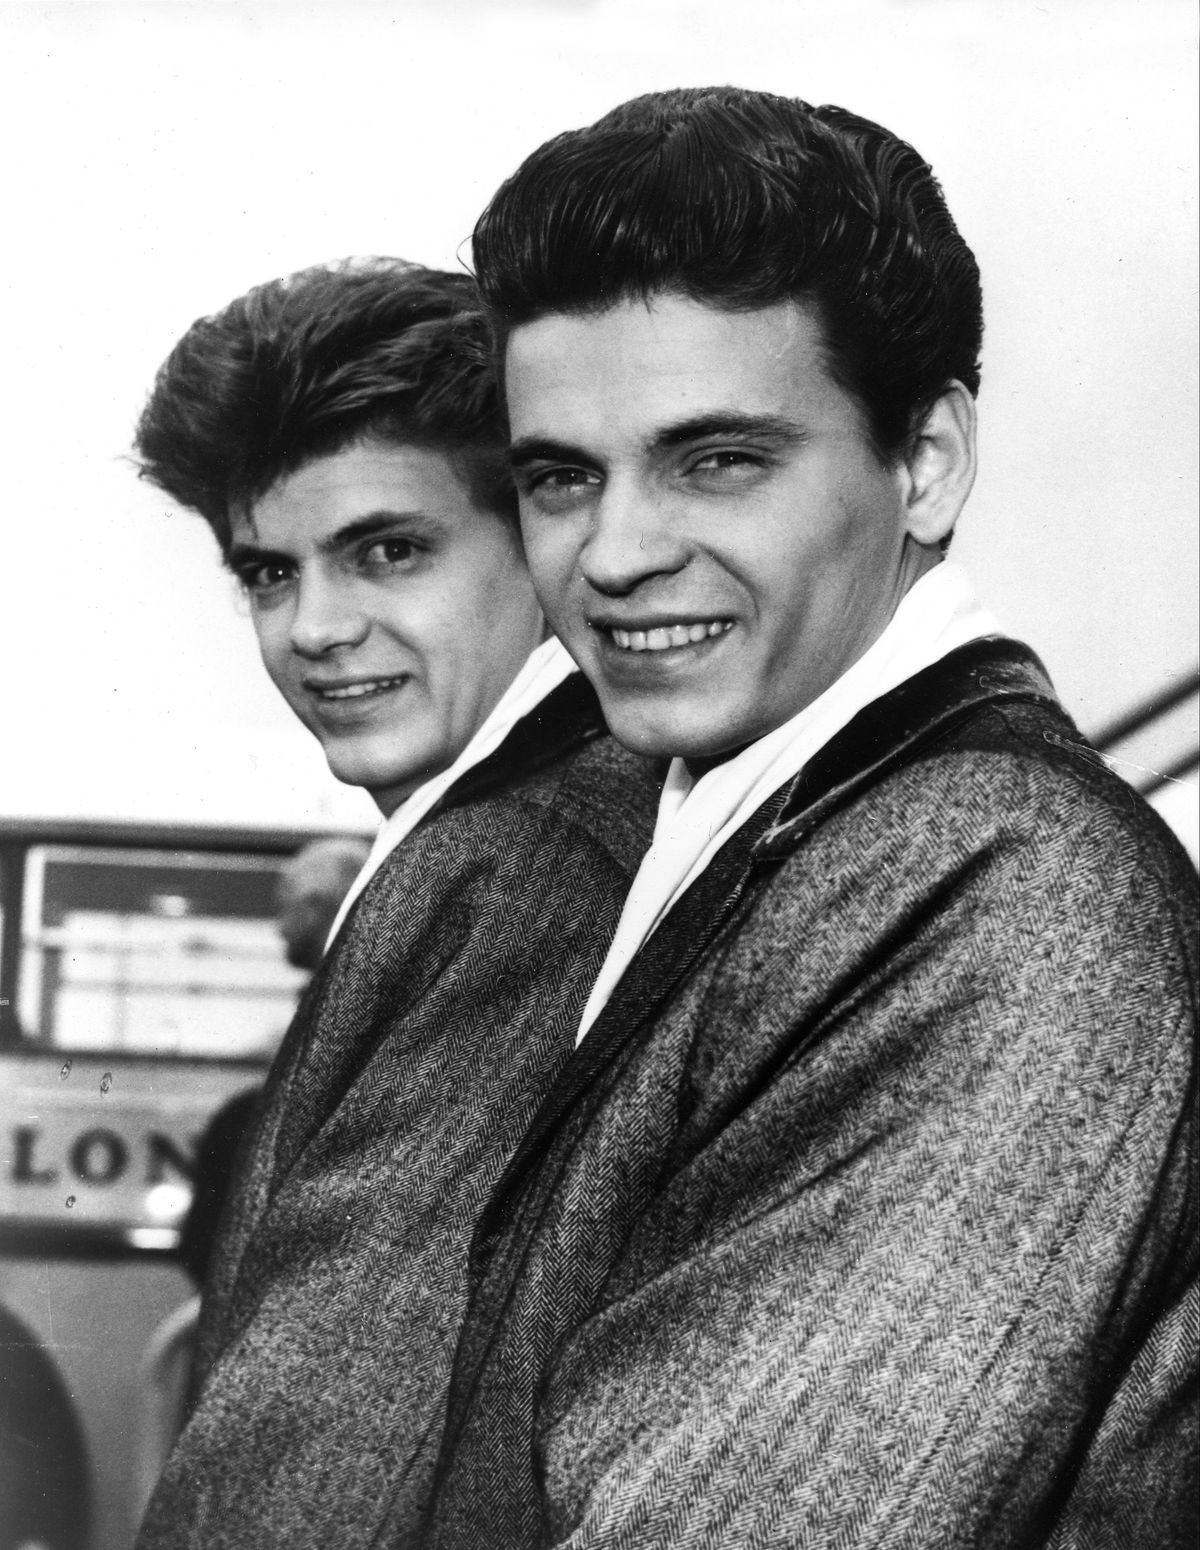 In this April 1, 1960 photo, Phil, left, and Don of the Everly Brothers arrive at London Airport from New York to begin their European tour. Don Everly, one-half of the pioneering rock ’n’ roll Everly Brothers whose harmonizing country rock hits impacted a generation of rock music, has died. He was 84. A family official said Everly died at his home in Nashville, Tennessee, on Saturday, Aug. 21, 2021.  (STF)